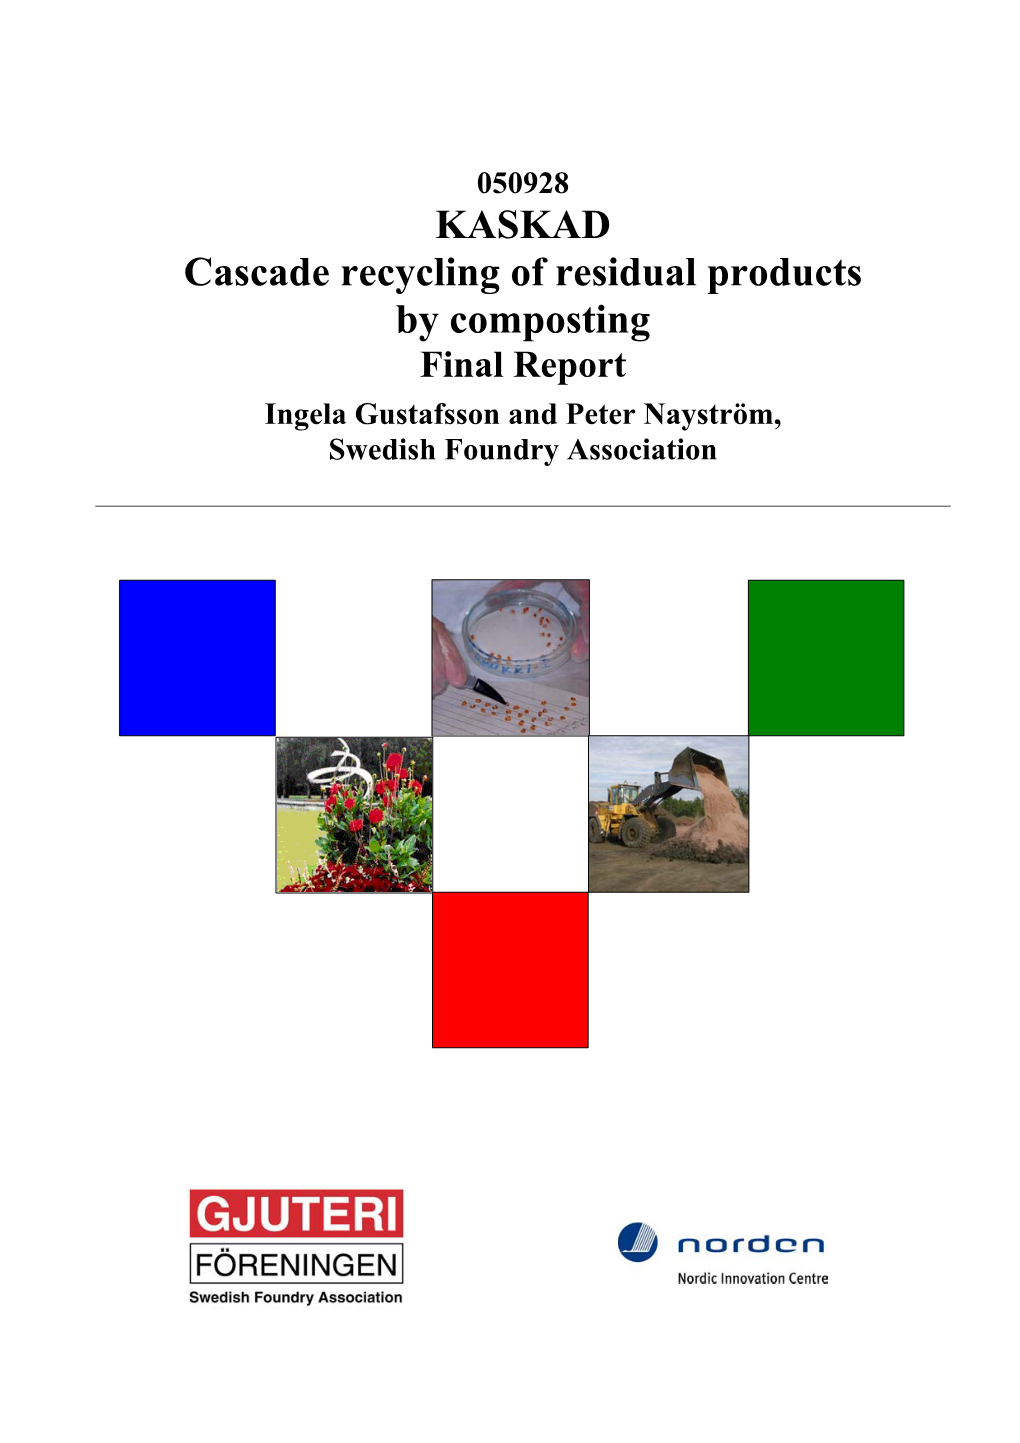 KASKAD Cascade Recycling of Residual Products by Composting